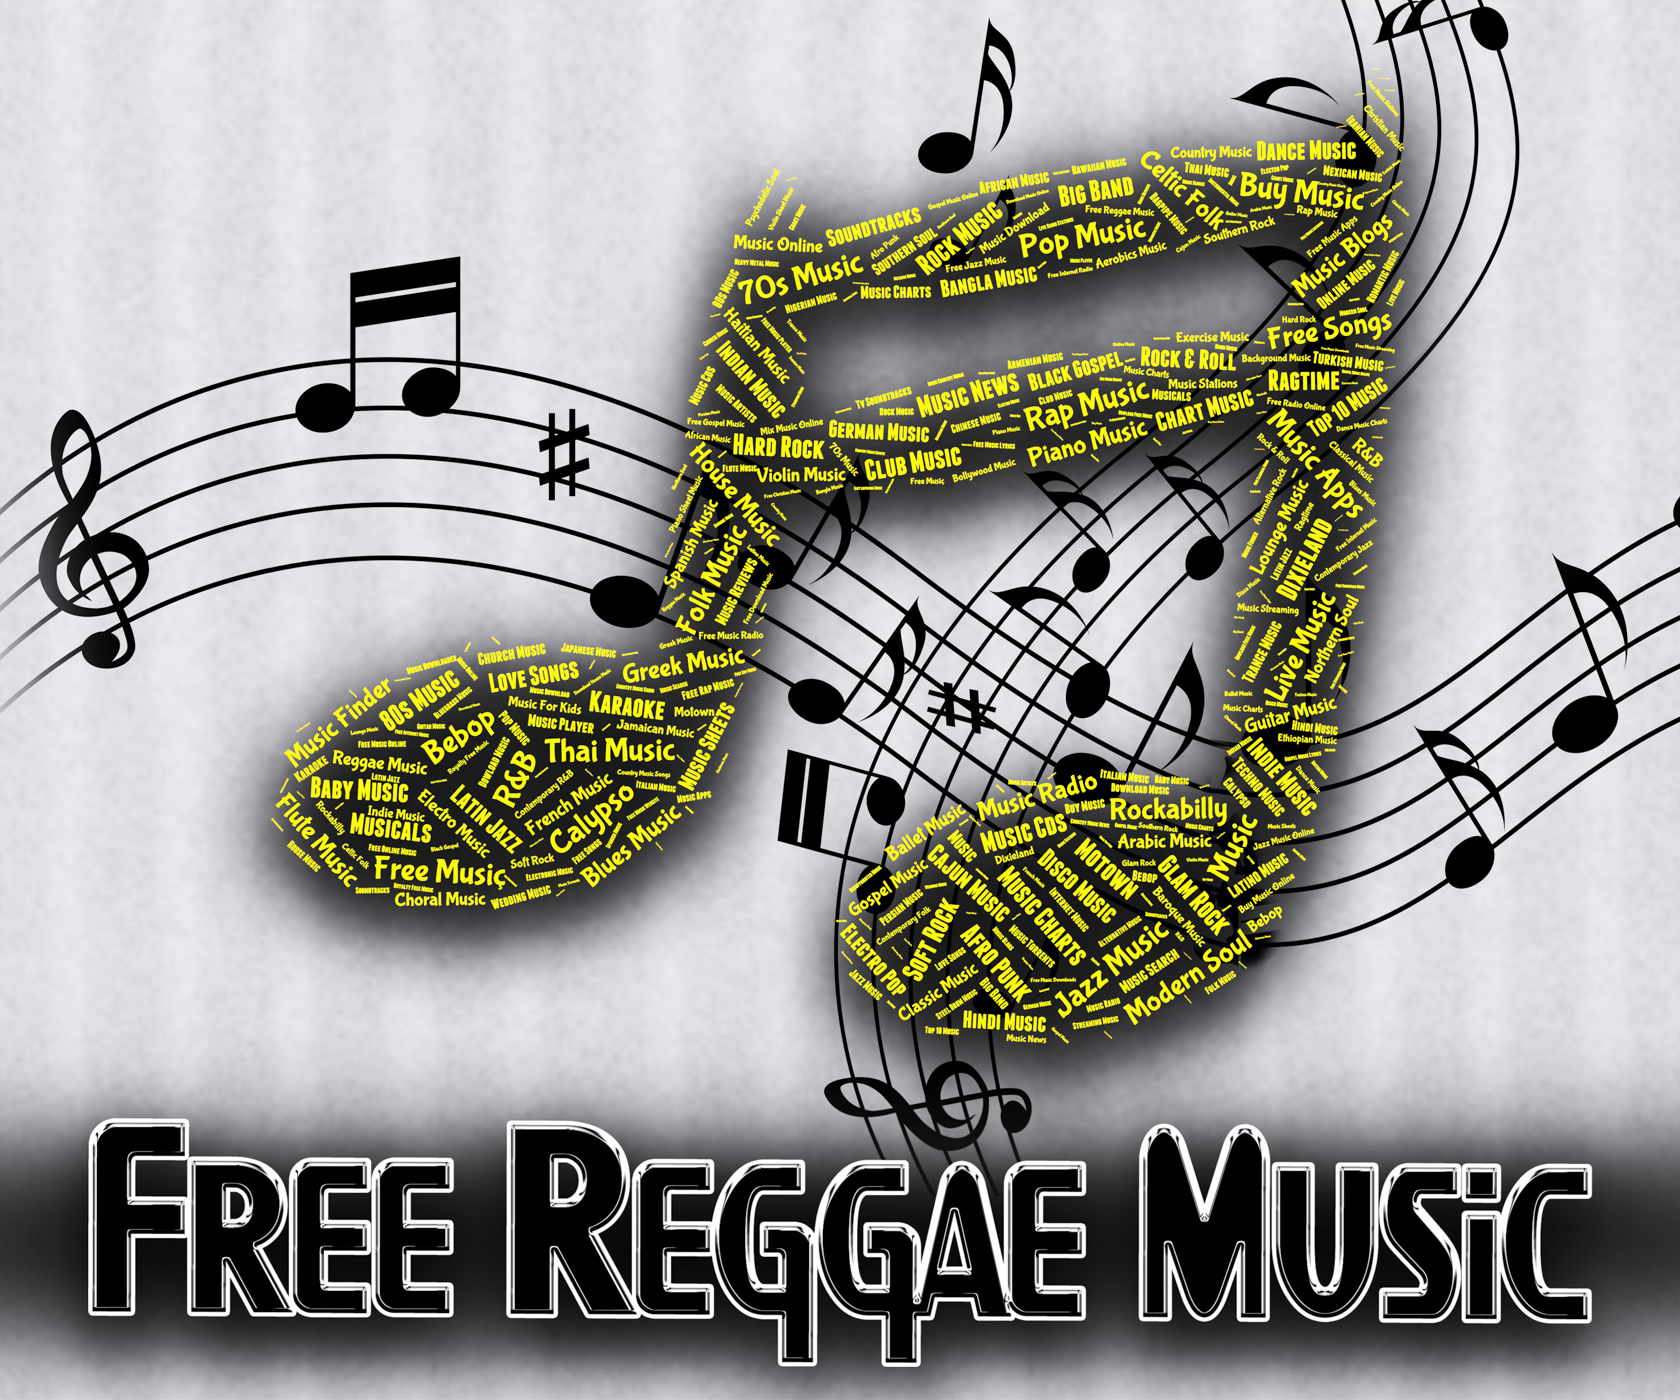 Reggae roots songs free download